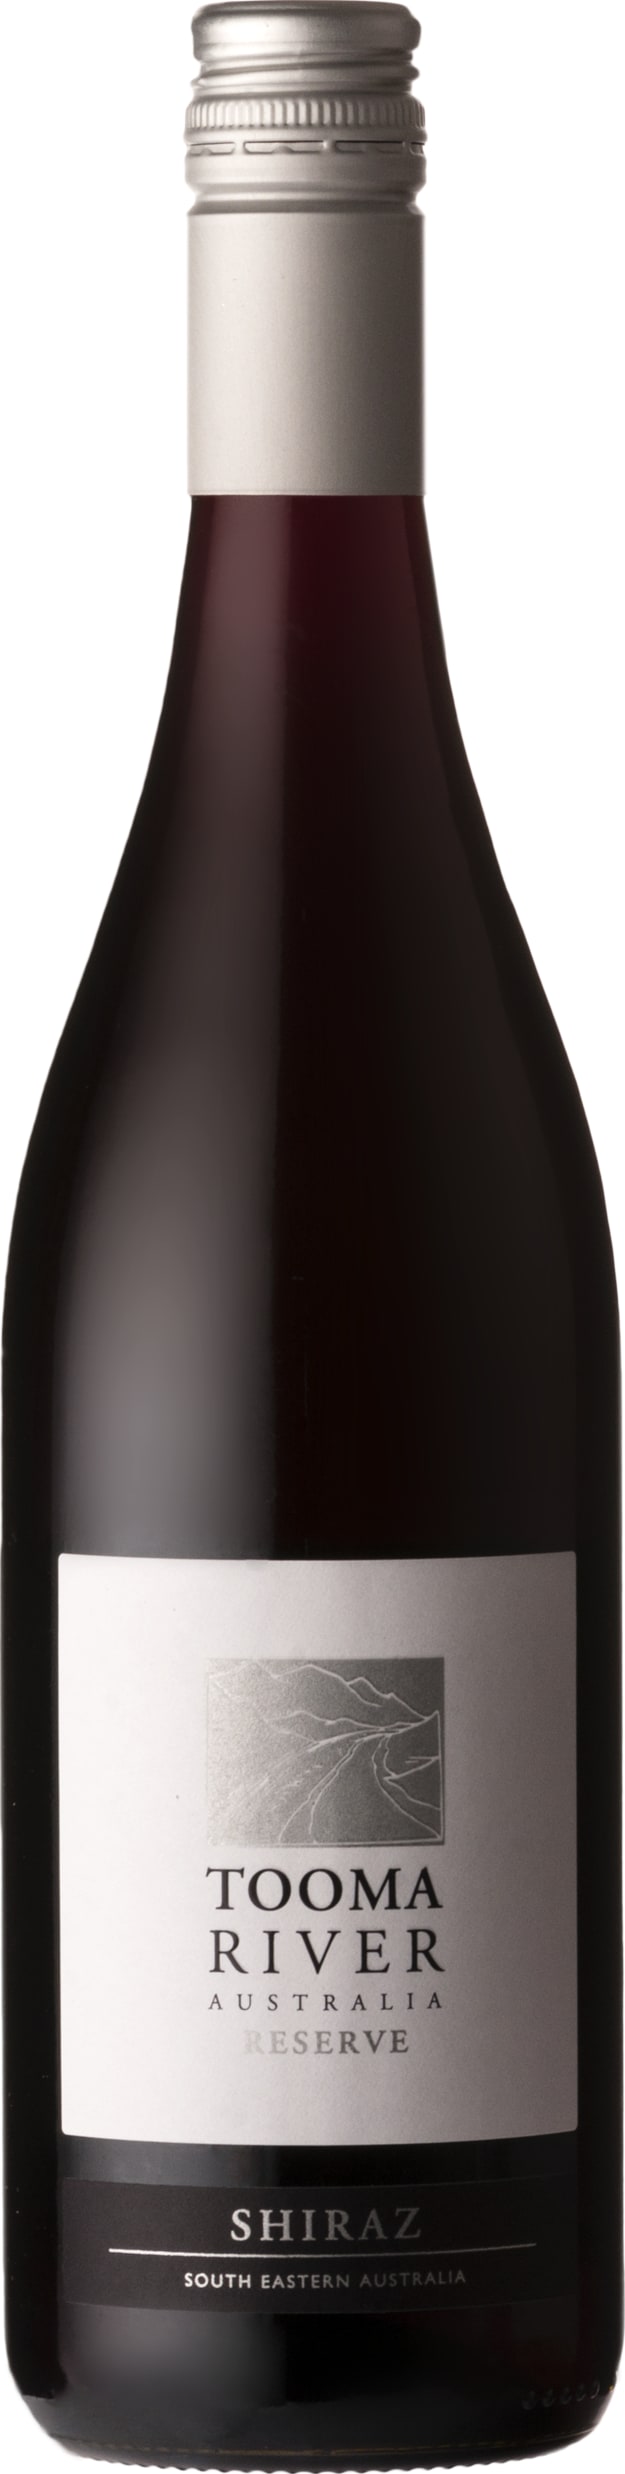 Tooma River Shiraz 2021 75cl - Buy Tooma River Wines from GREAT WINES DIRECT wine shop